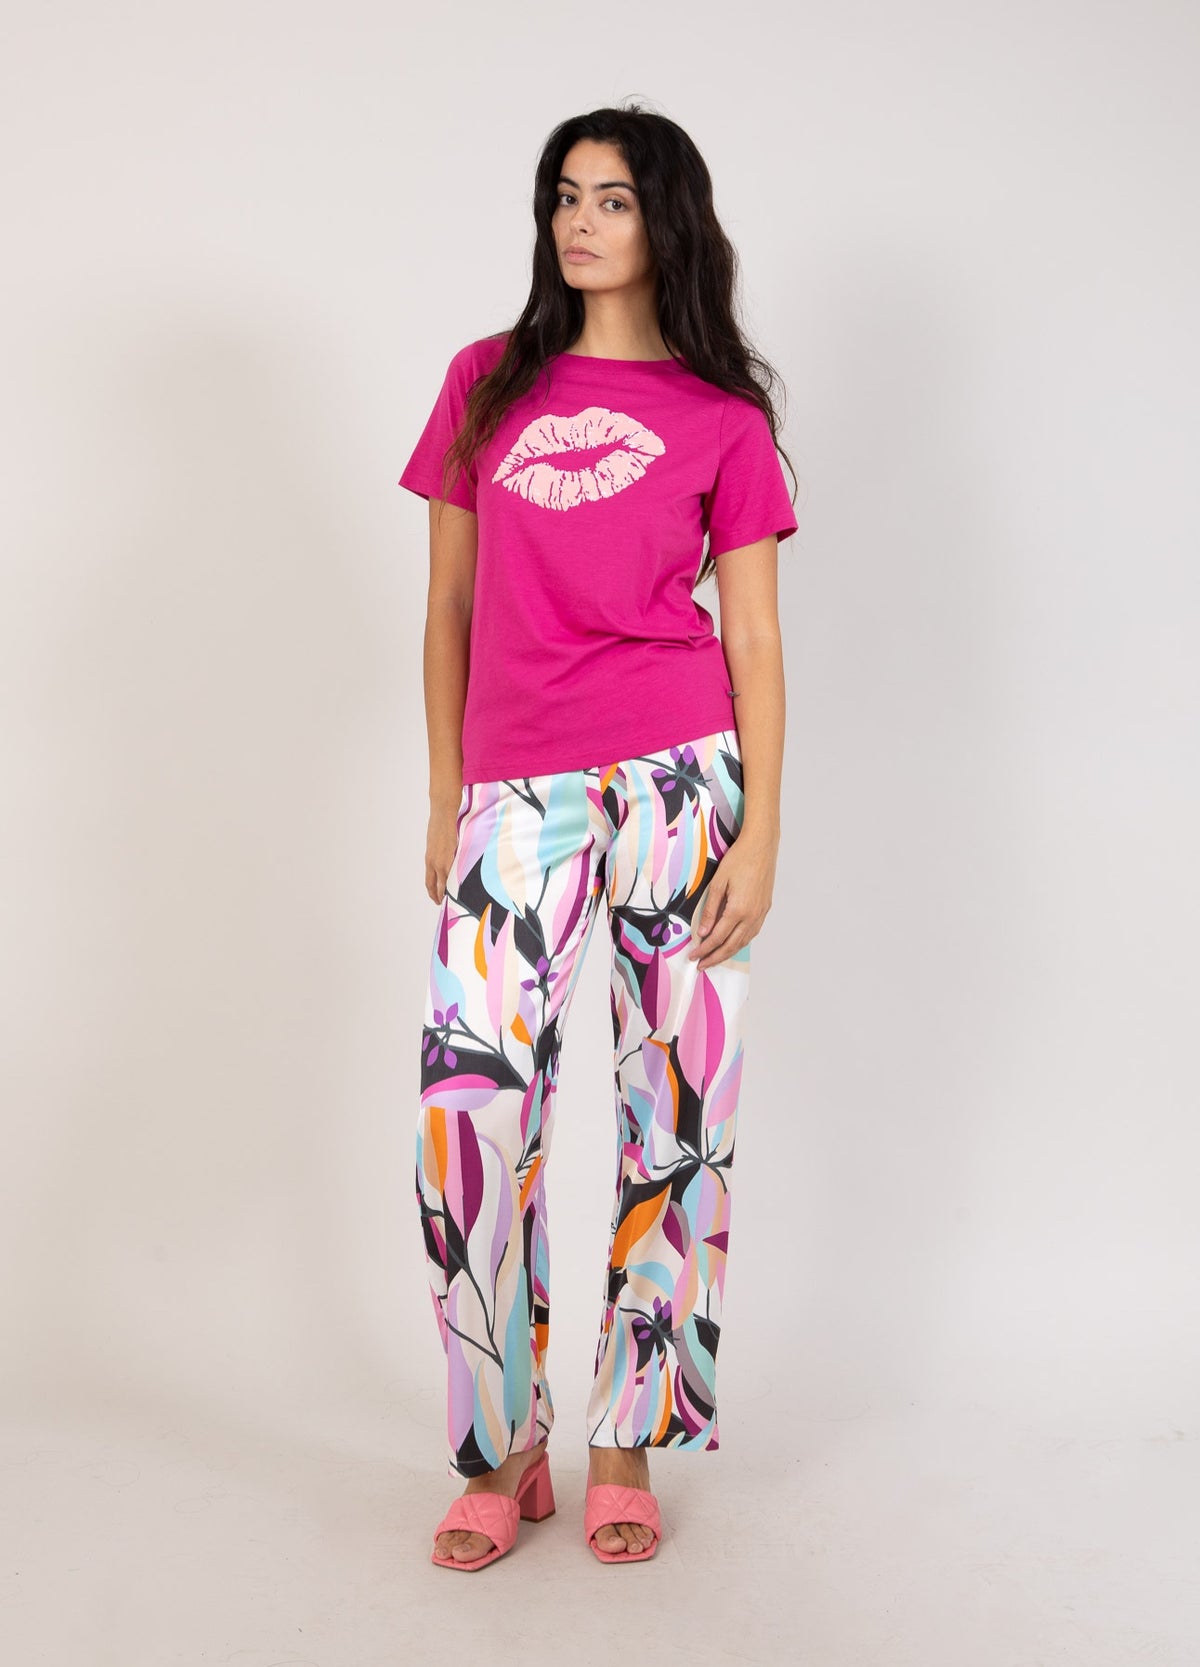 Coster Copenhagen Berry T-Shirt with Kissing Lips, 241-1143